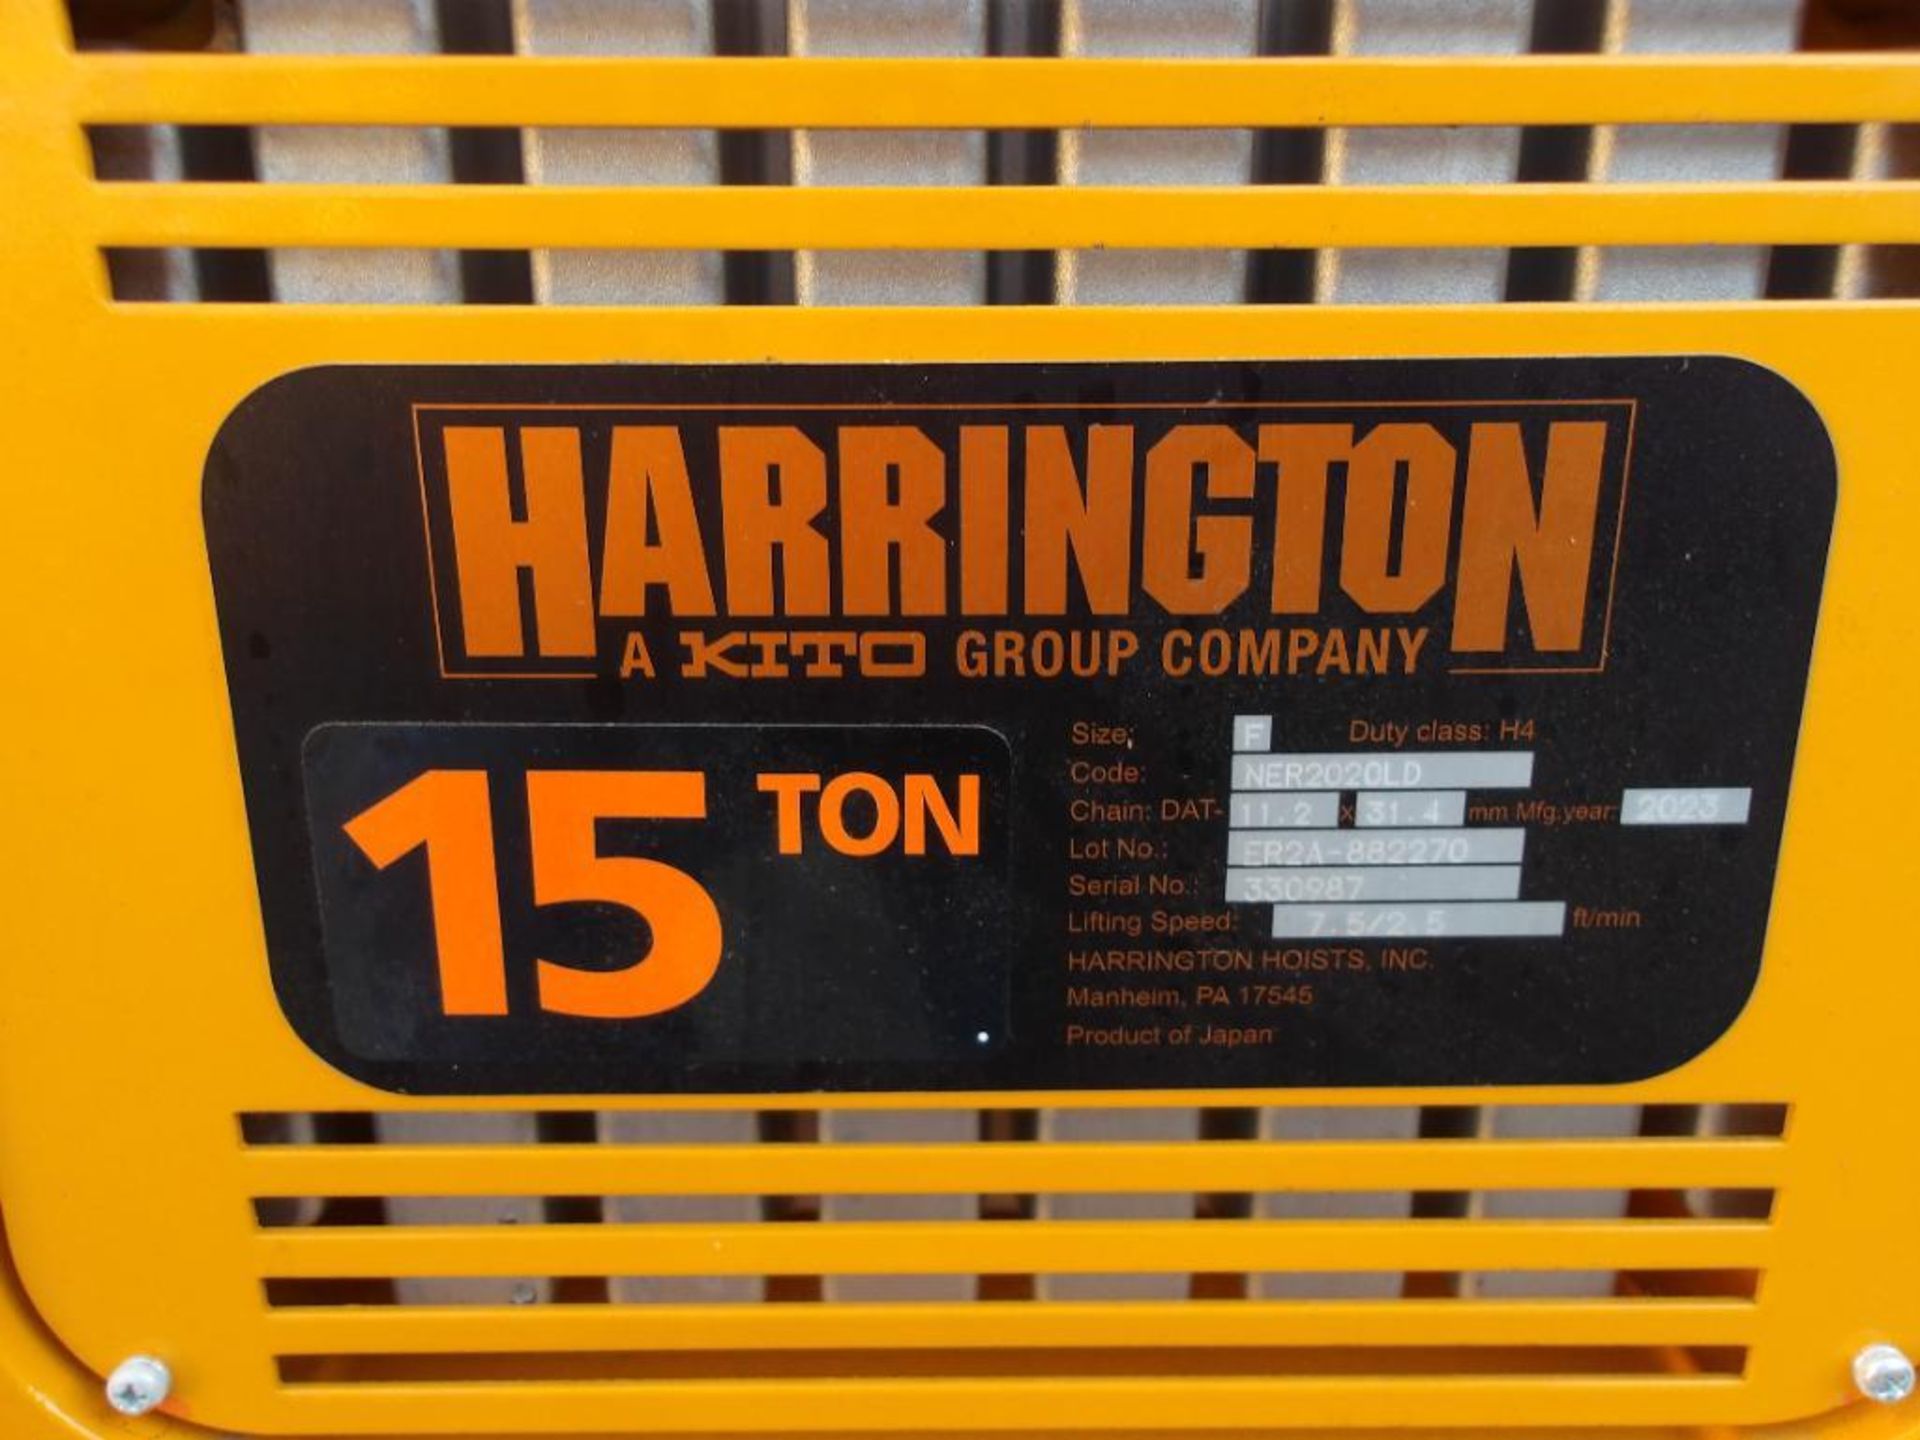 Harrington Electric 15-Ton Chain Hoist, Code: NER2020LD, S/N 330987 (New in Crate) - Image 2 of 4